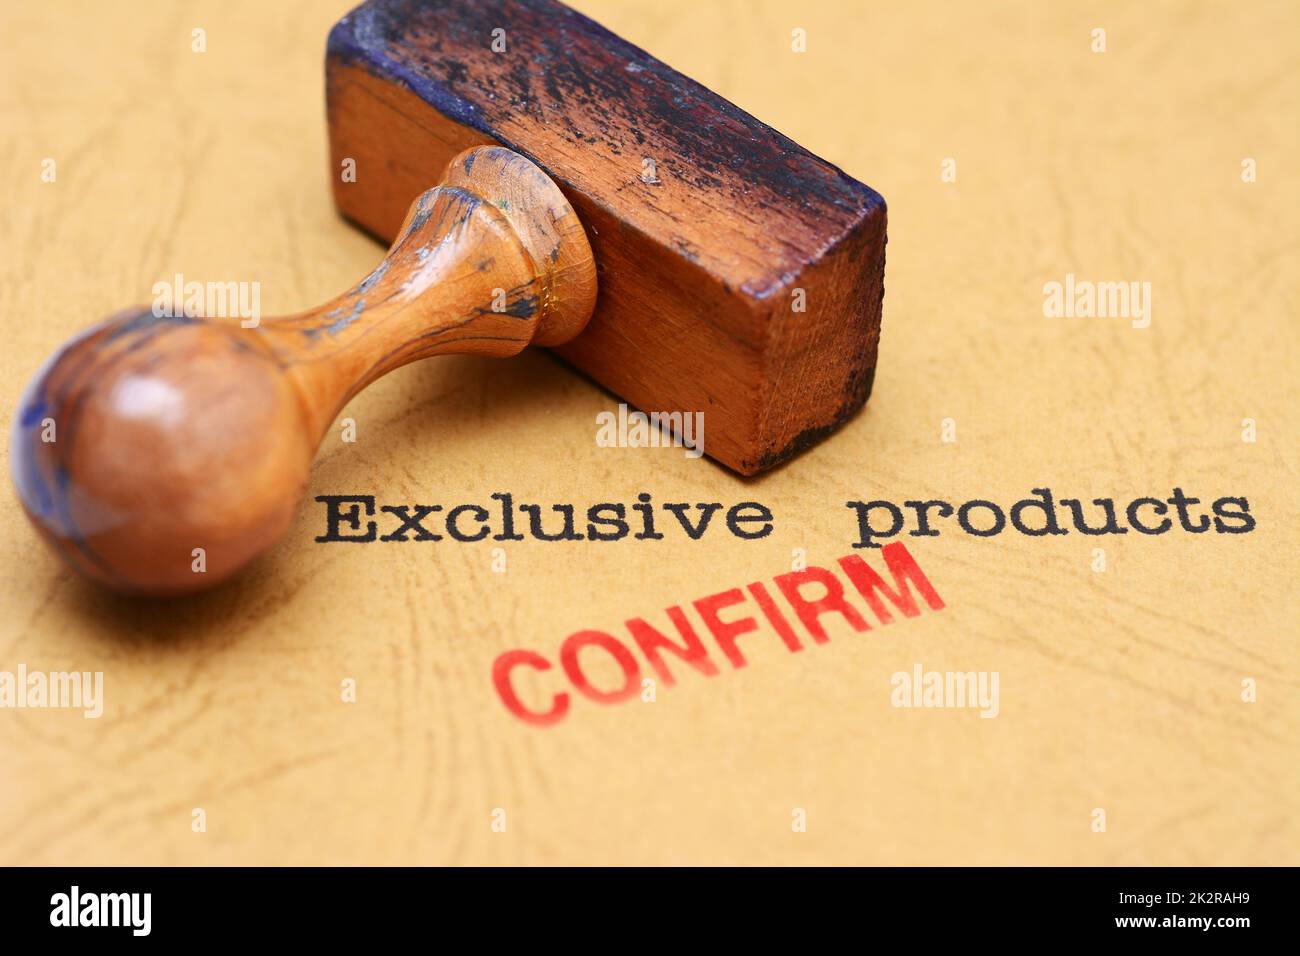 Exclusive products Stock Photo